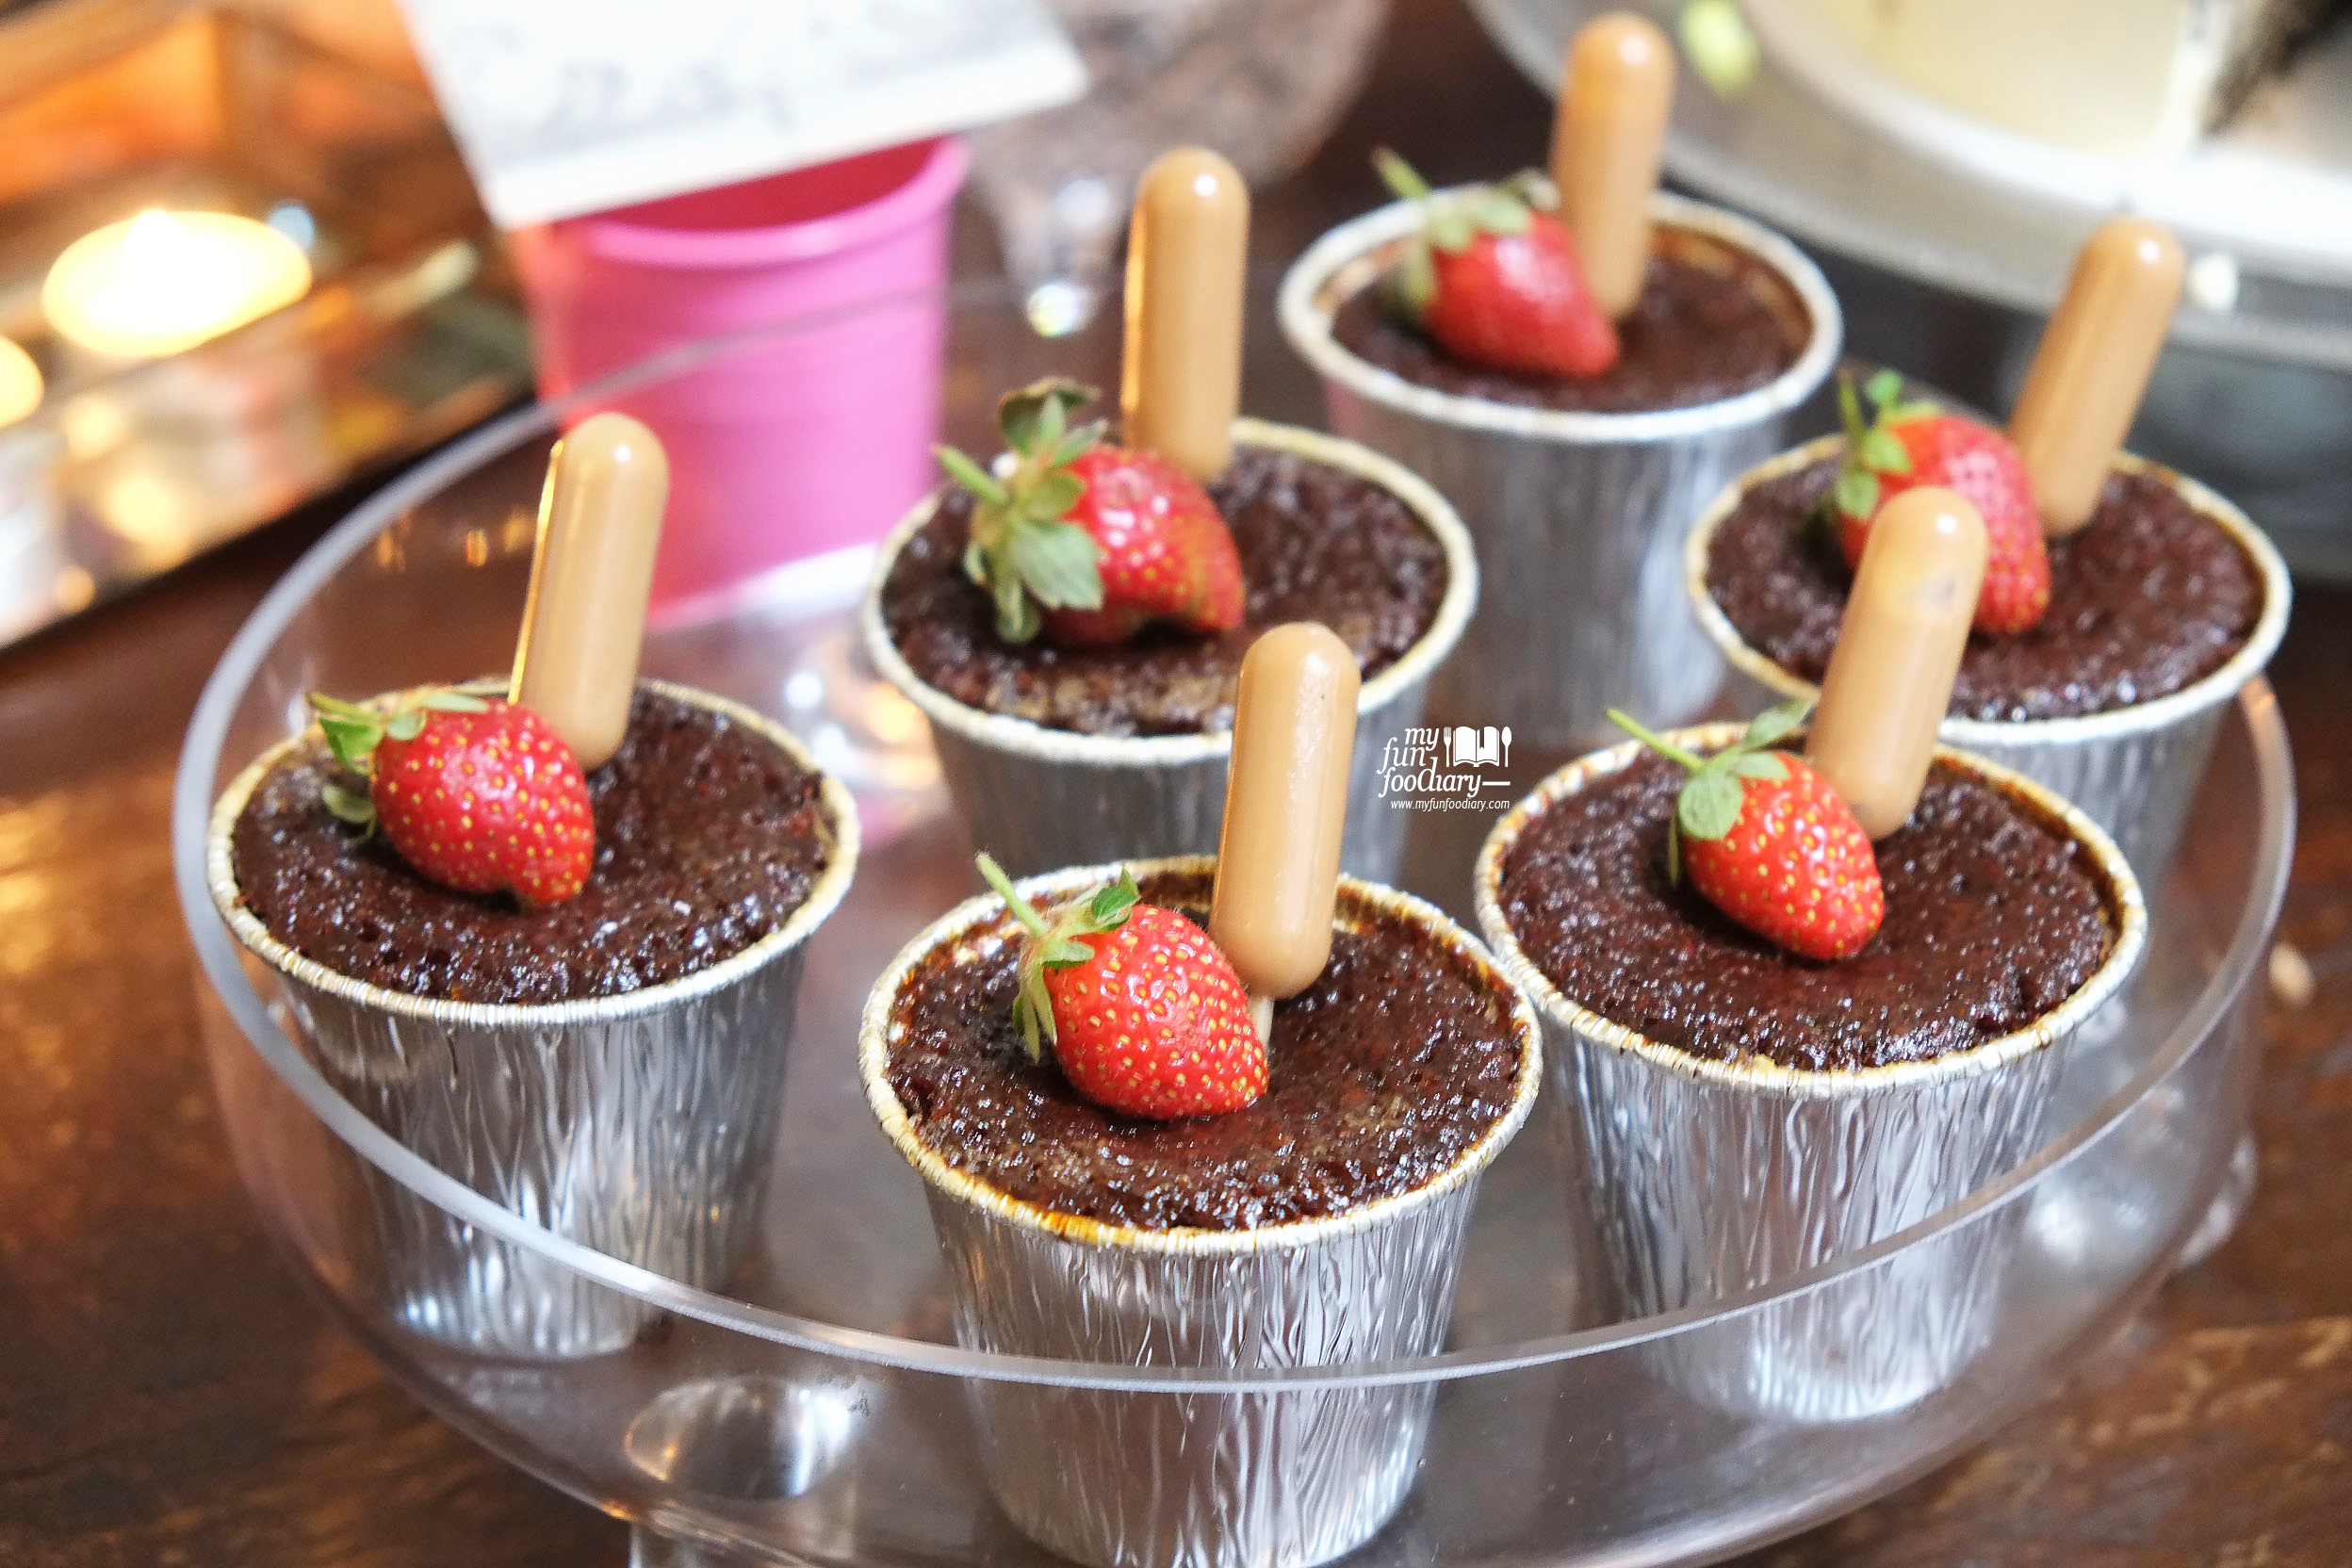 Sticky Date Pudding with Toffee Sauce made by Putri Miranti at Hyde Kemang - by Myfunfoodiary